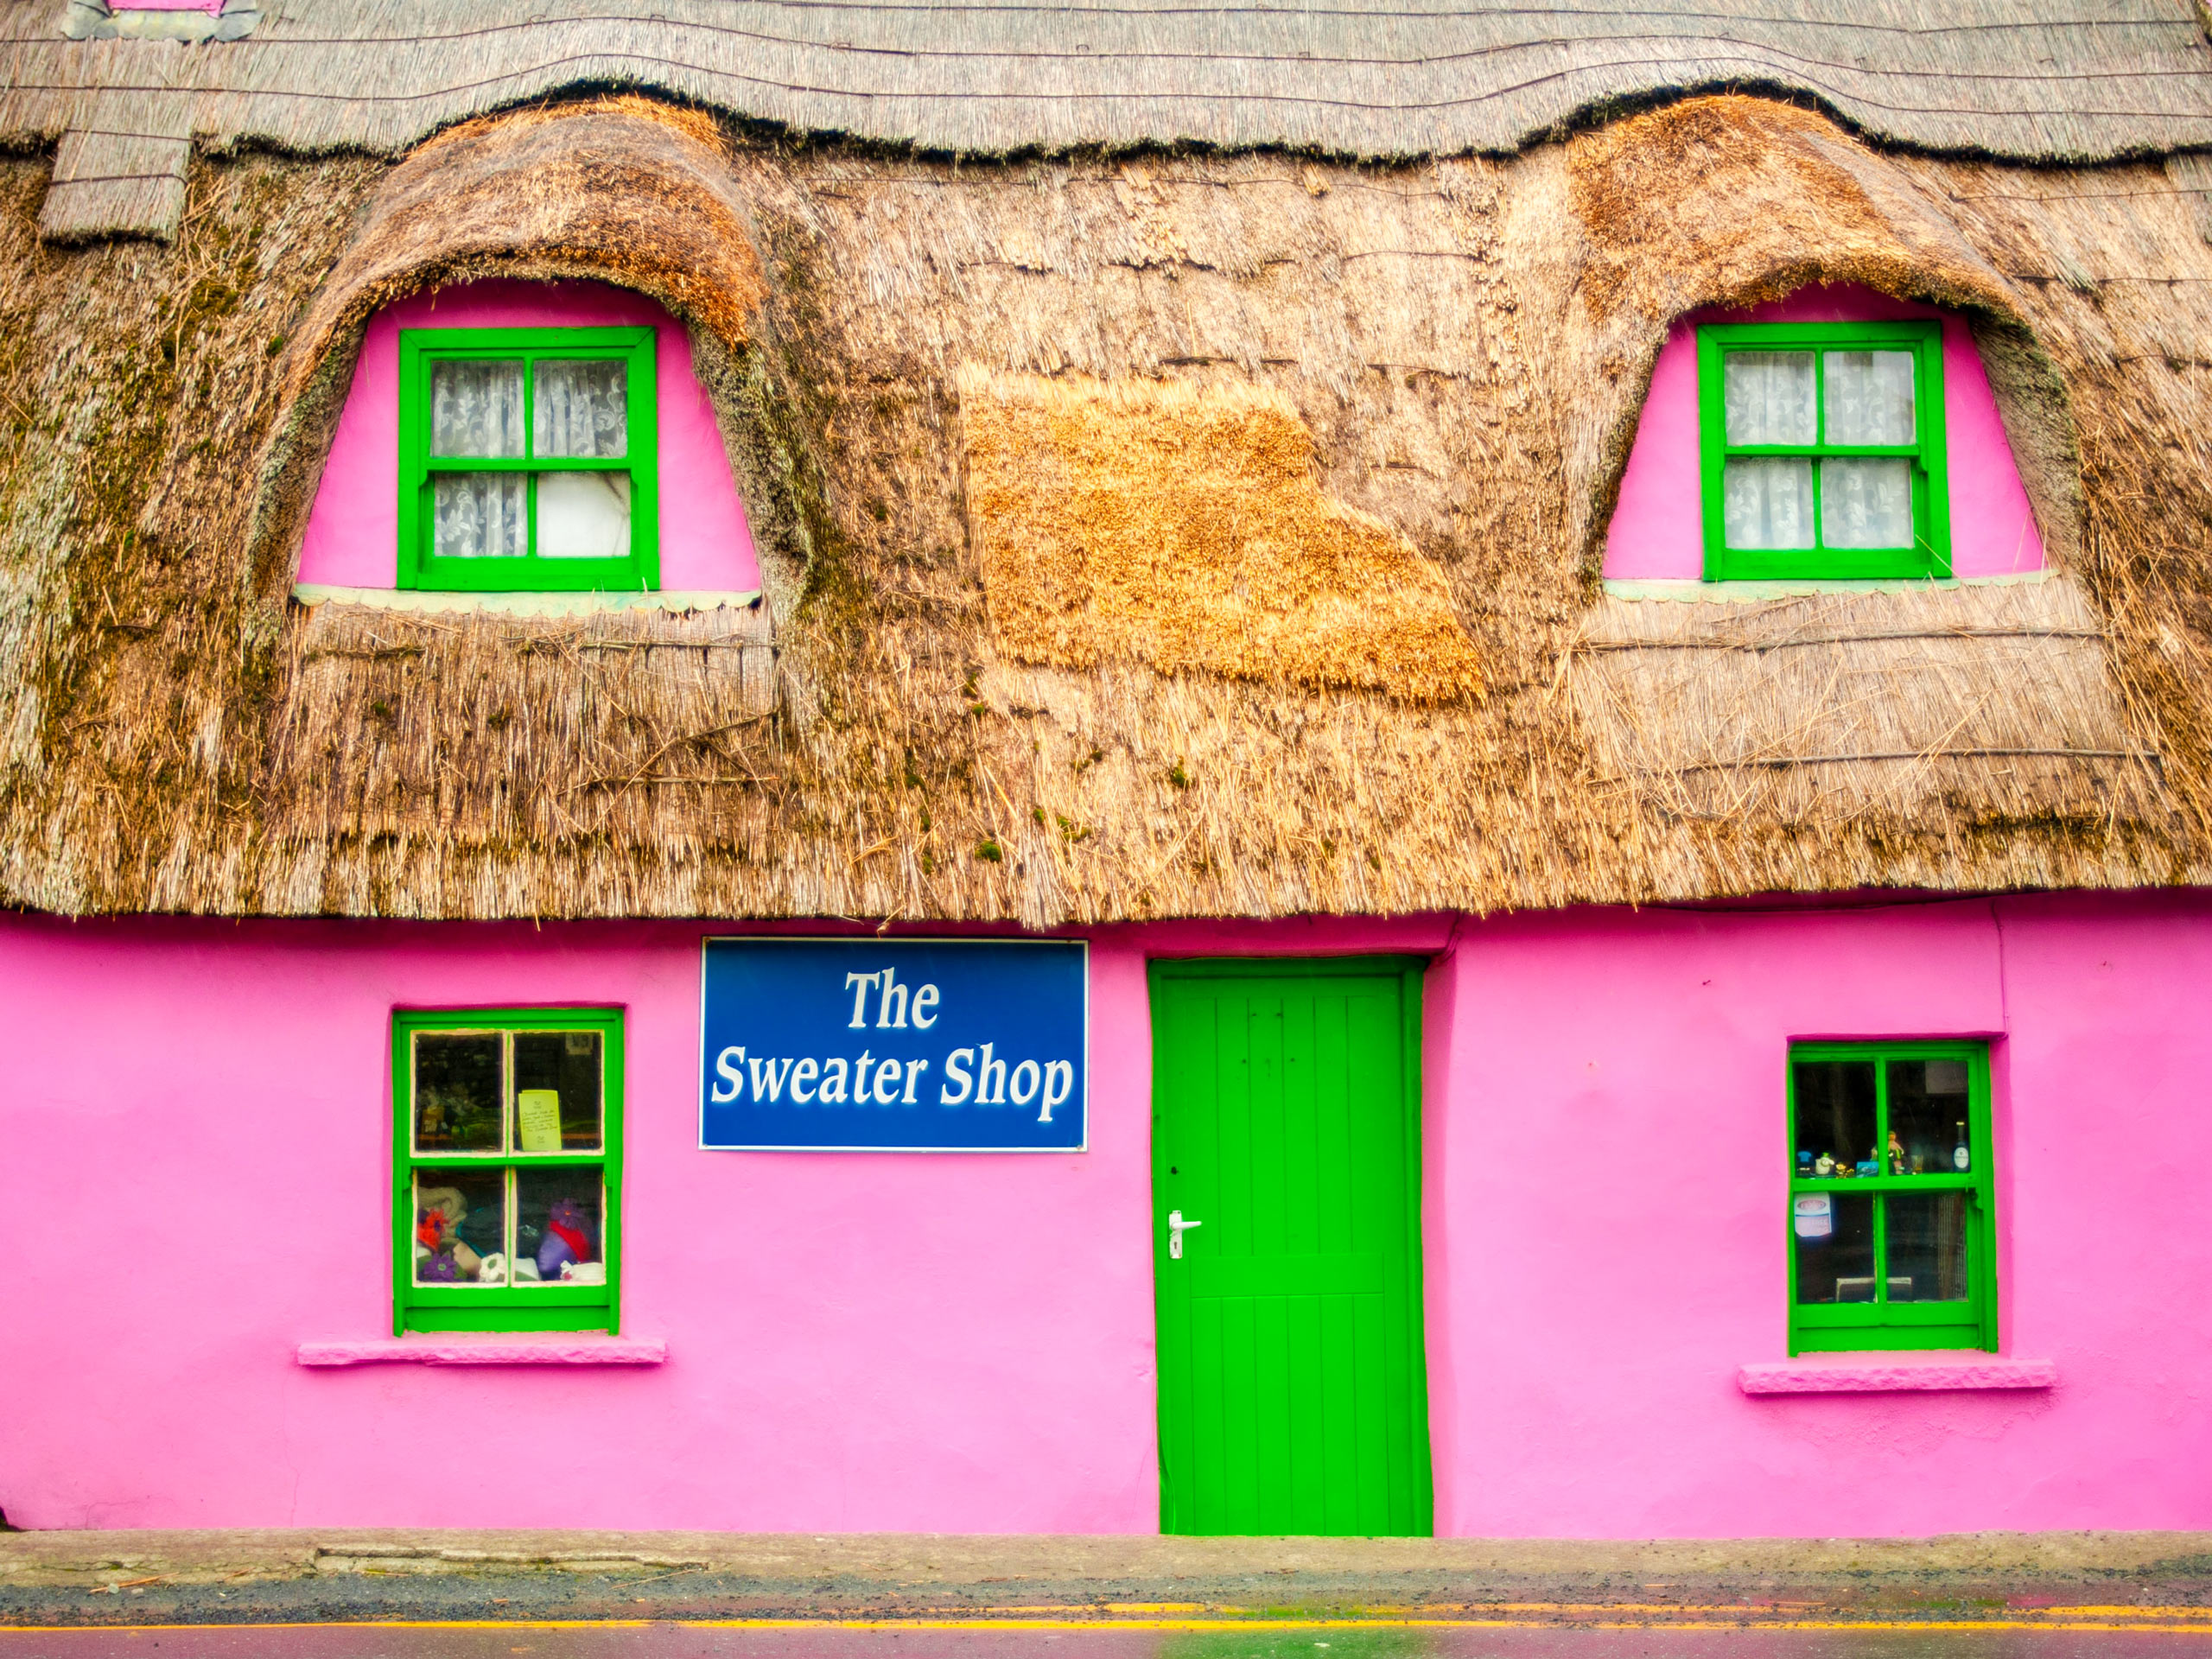 Thatched roof house in Doolin